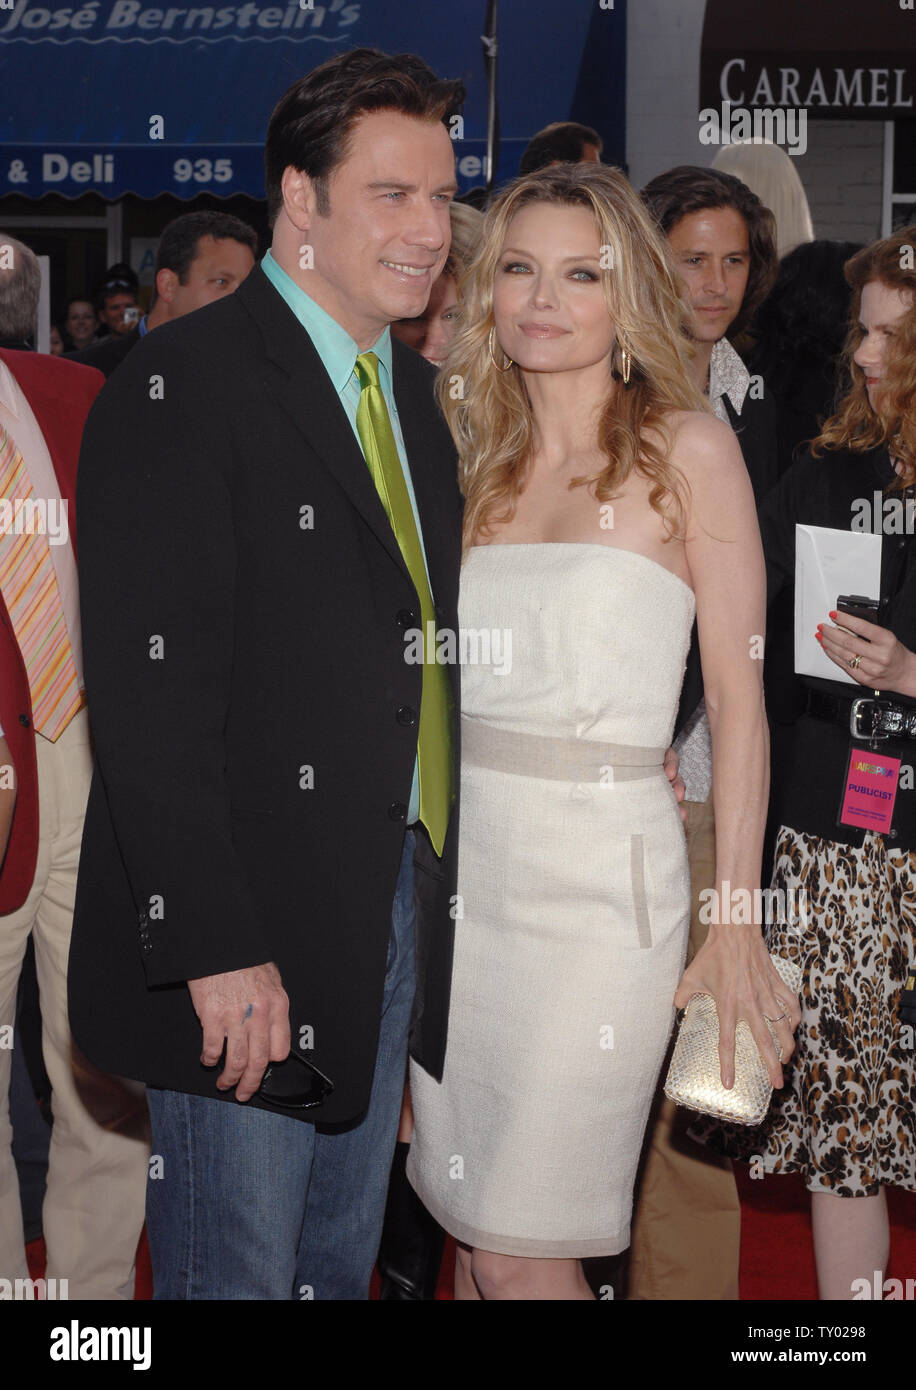 John travolta michelle pfeiffer hi-res stock photography and images - Alamy